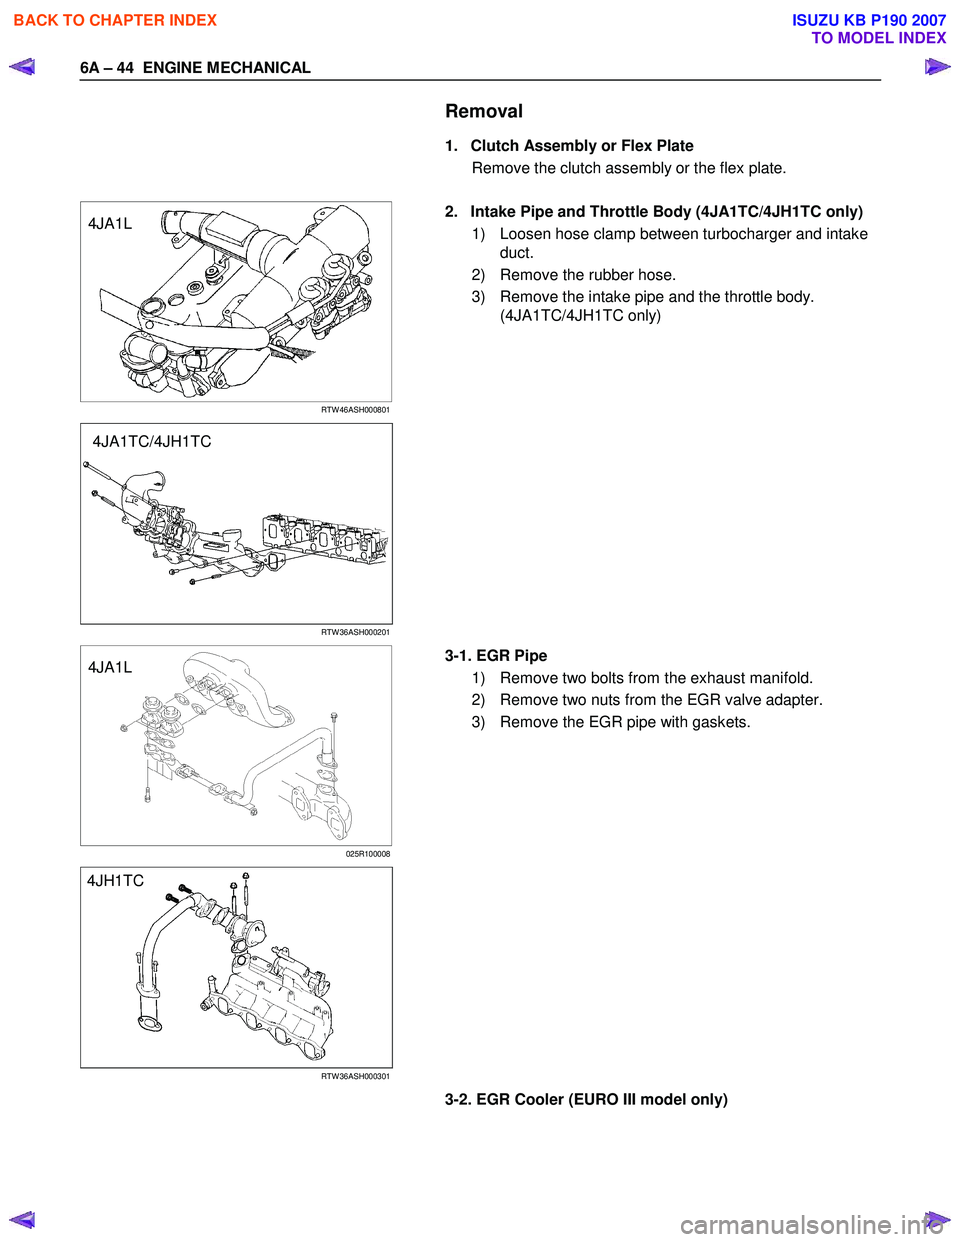 ISUZU KB P190 2007  Workshop Owners Manual 6A – 44  ENGINE MECHANICAL 
  Removal 
  1.  Clutch Assembly or Flex Plate 
Remove the clutch assembly or the flex plate.  
 
 
 
 
4JA1L RTW 46ASH000801   
2.  Intake Pipe and Throttle Body (4JA1TC